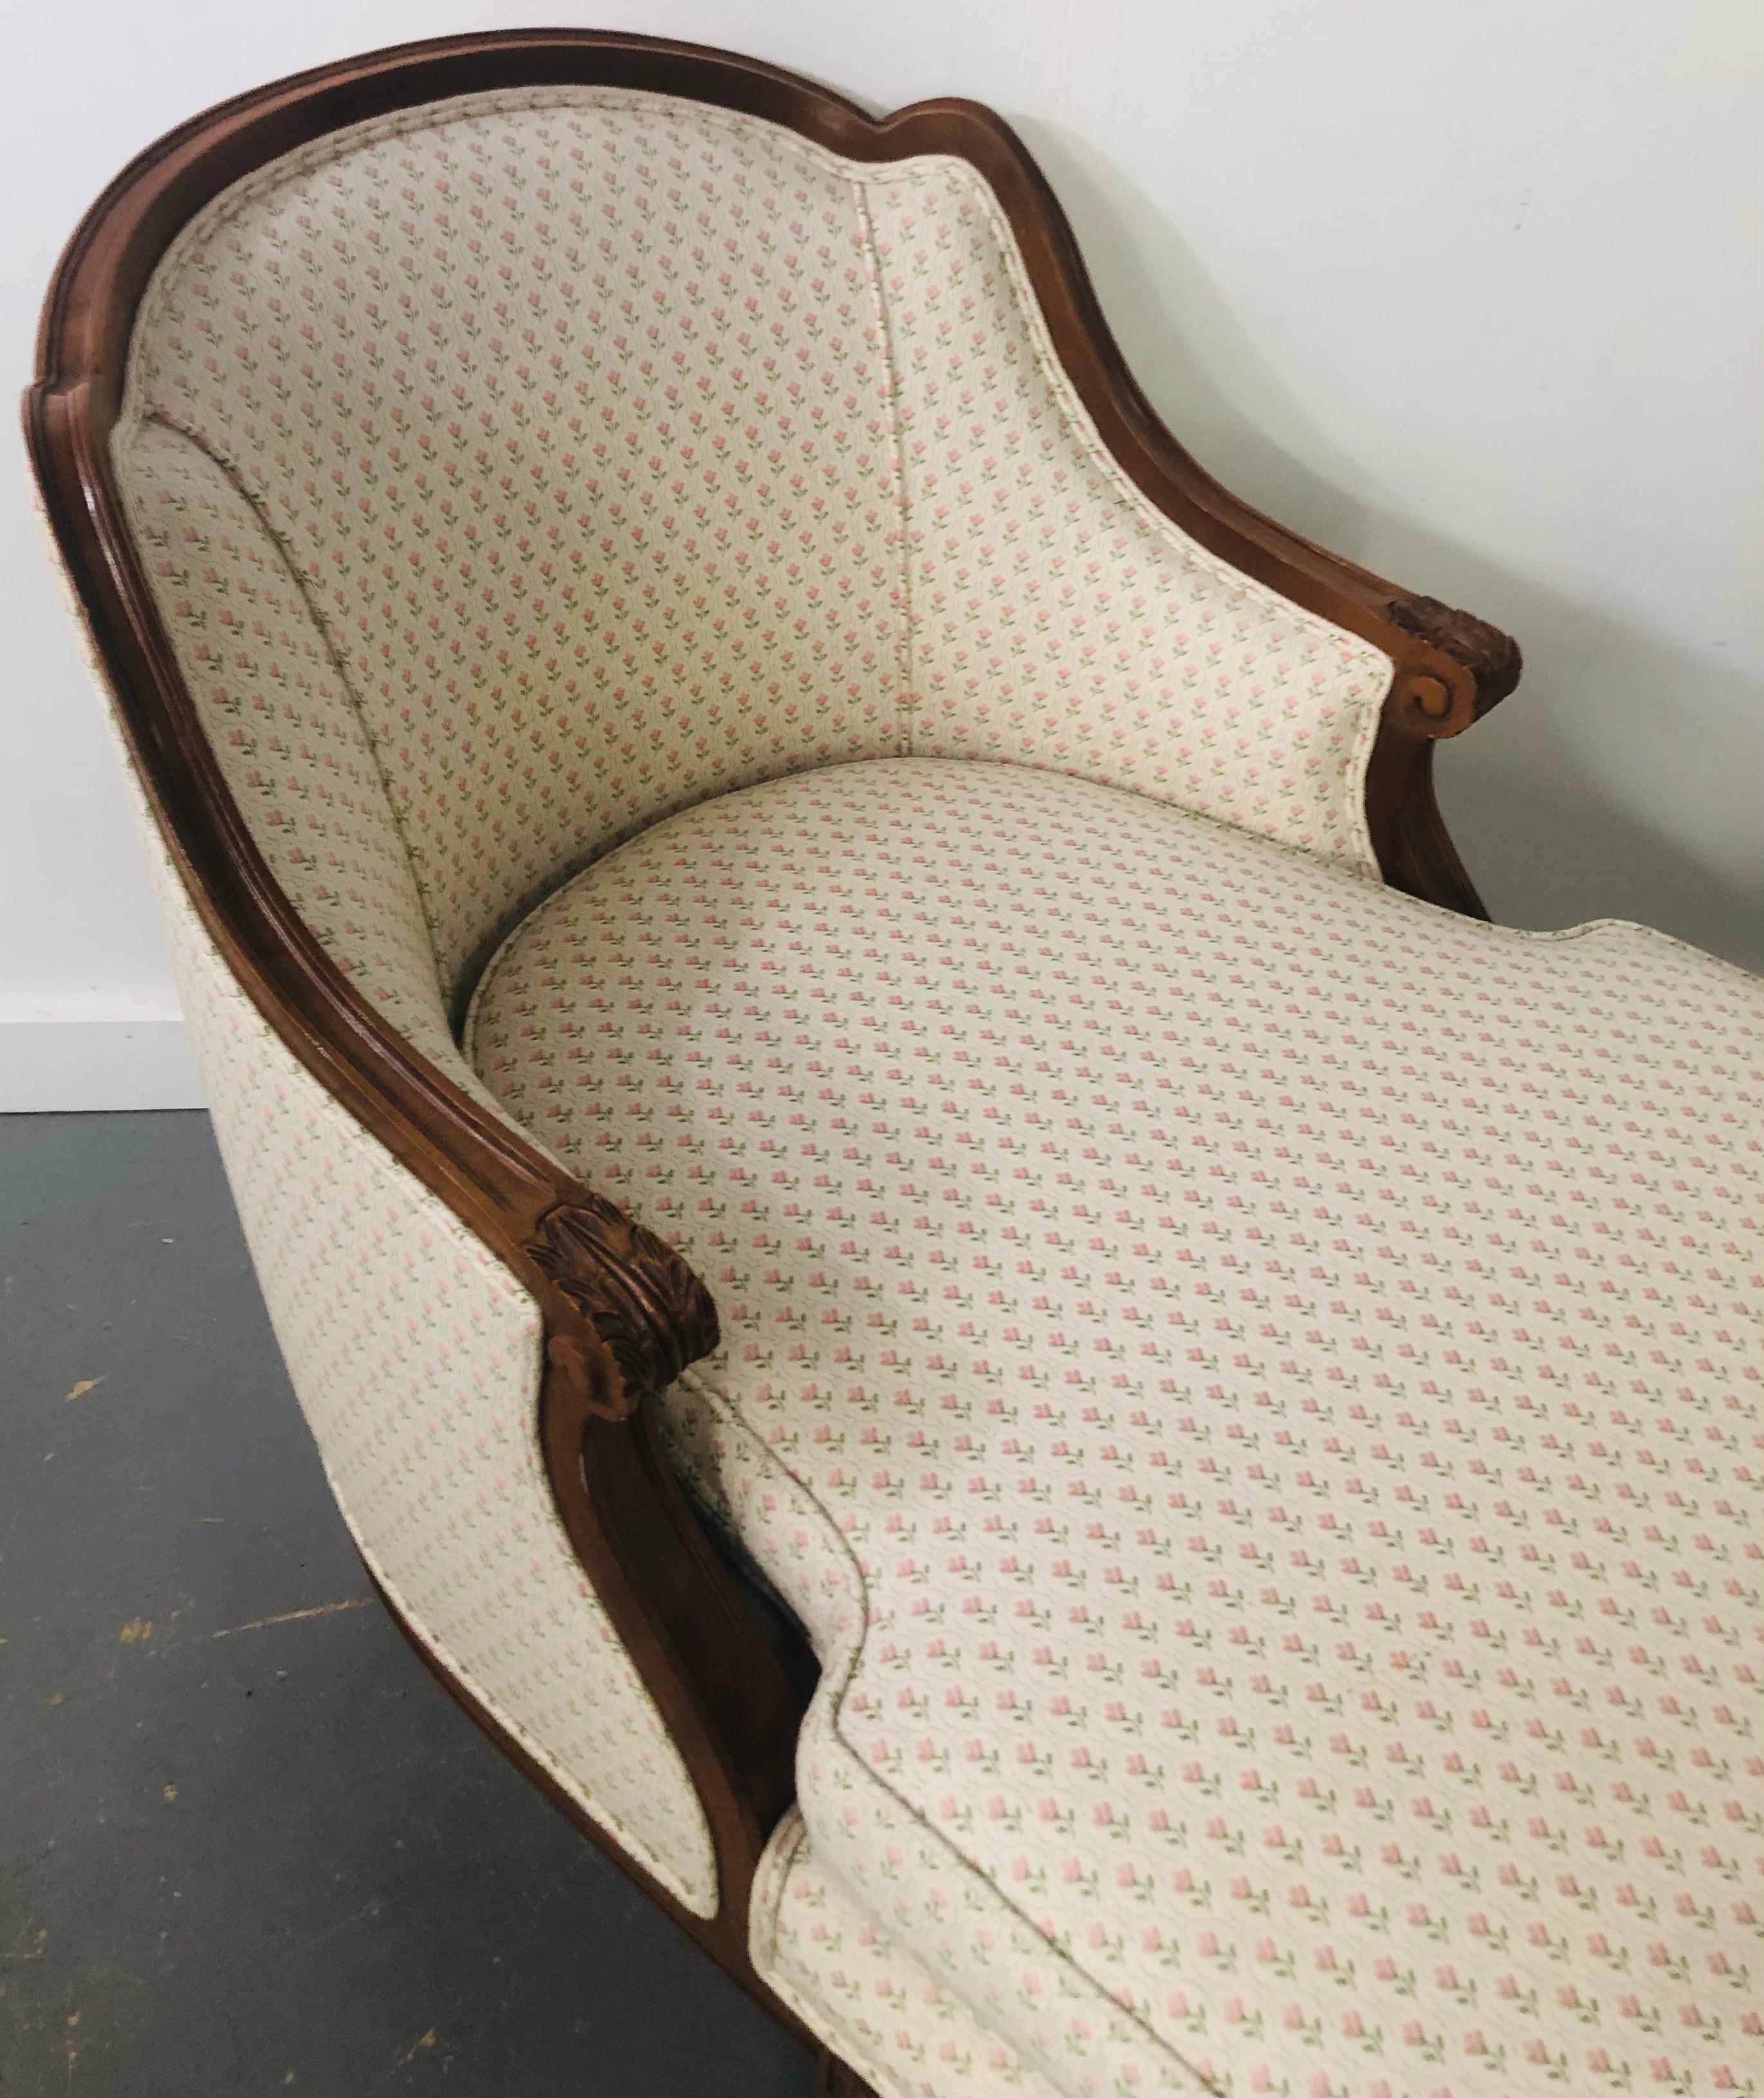 Upholstery 19th Century French Louis XVI Style Chaise Lounge, Sofa or Daybed